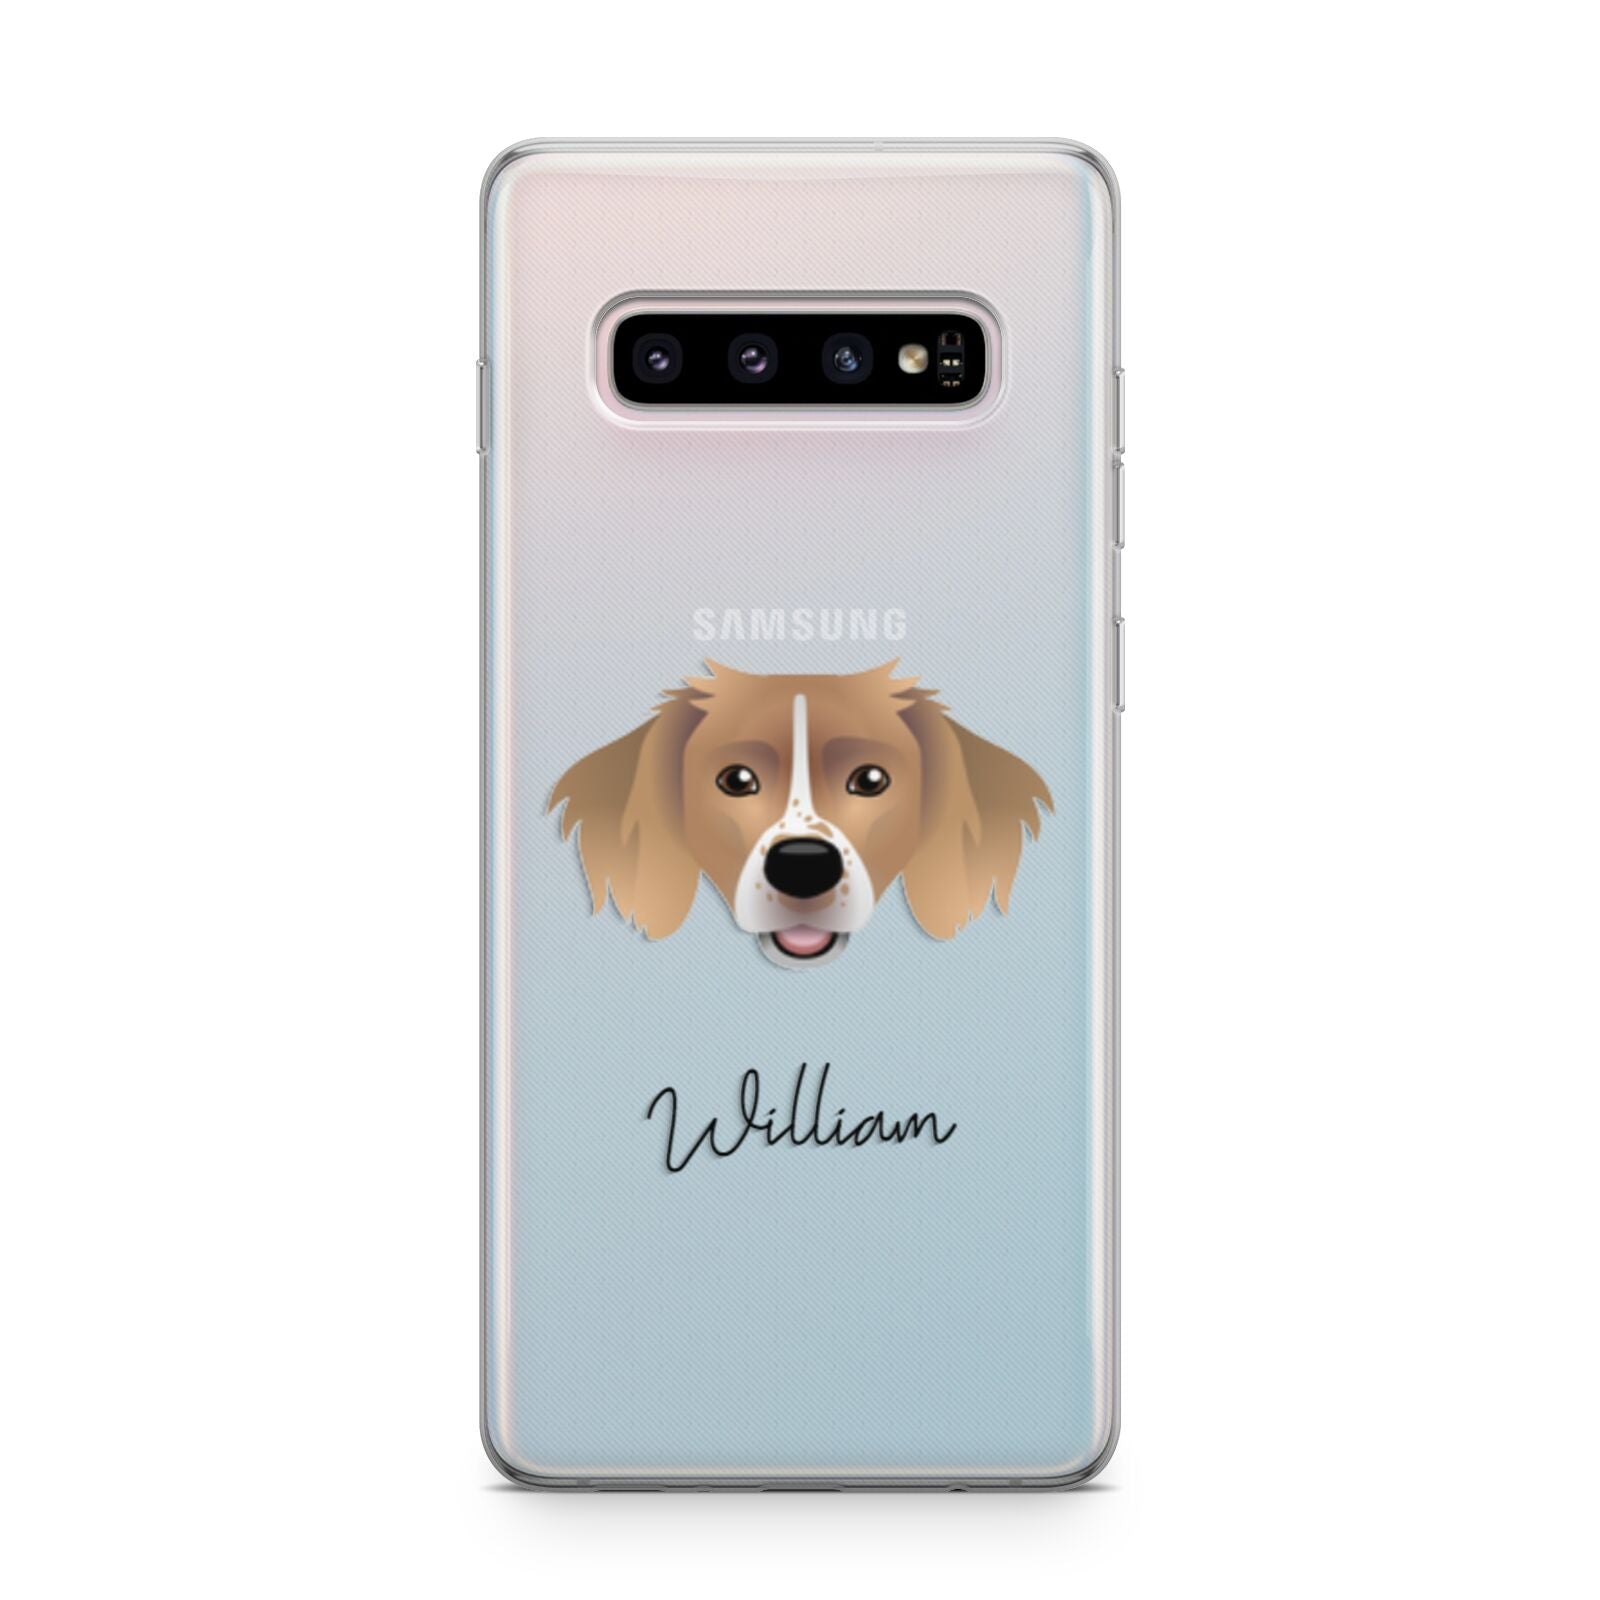 Sprollie Personalised Samsung Galaxy S10 Plus Case